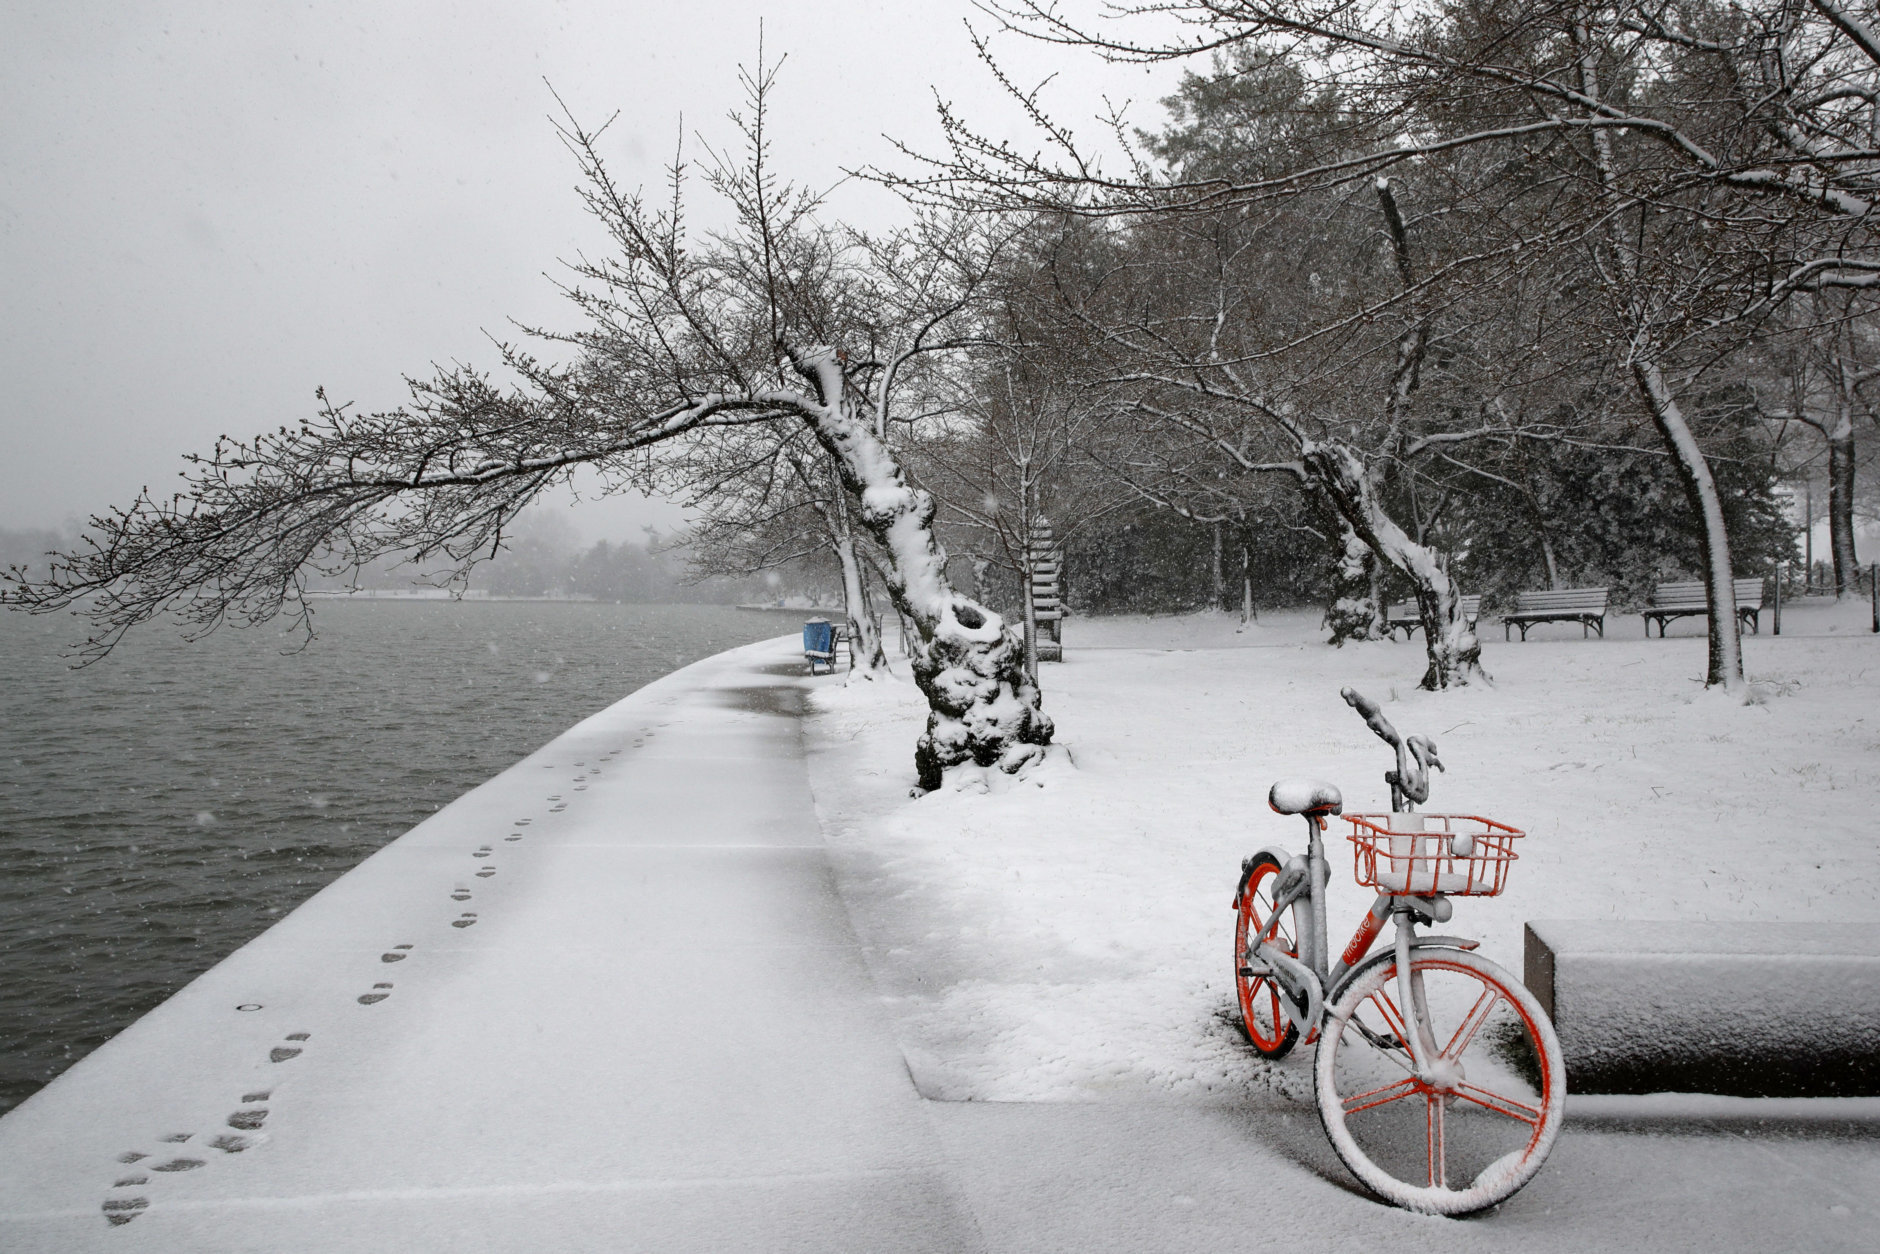 Snow falls on a lone bicycle and cherry blossom trees at the tidal basin, Wednesday, March 21, 2018, in Washington during a snow storm on the second day of spring. (AP Photo/Jacquelyn Martin)